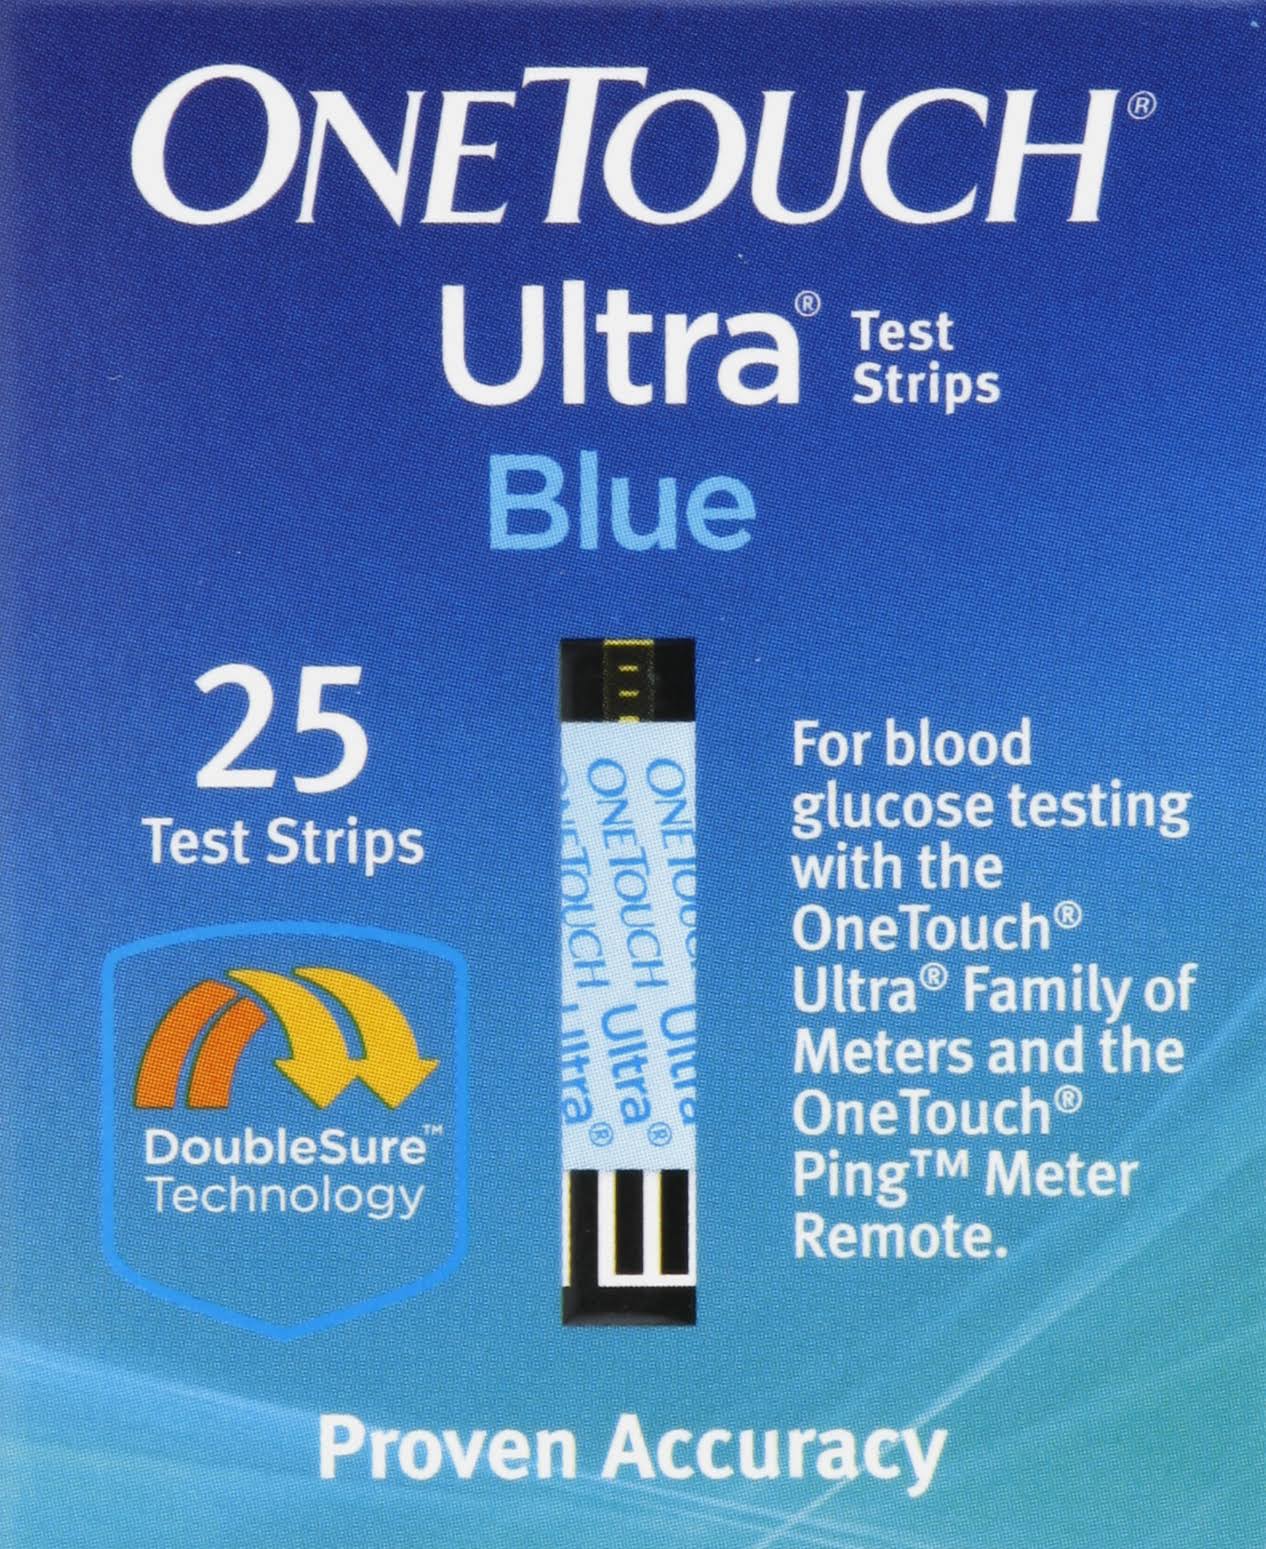 One Touch Ultra Blue Test Strips - 25 Test Strips